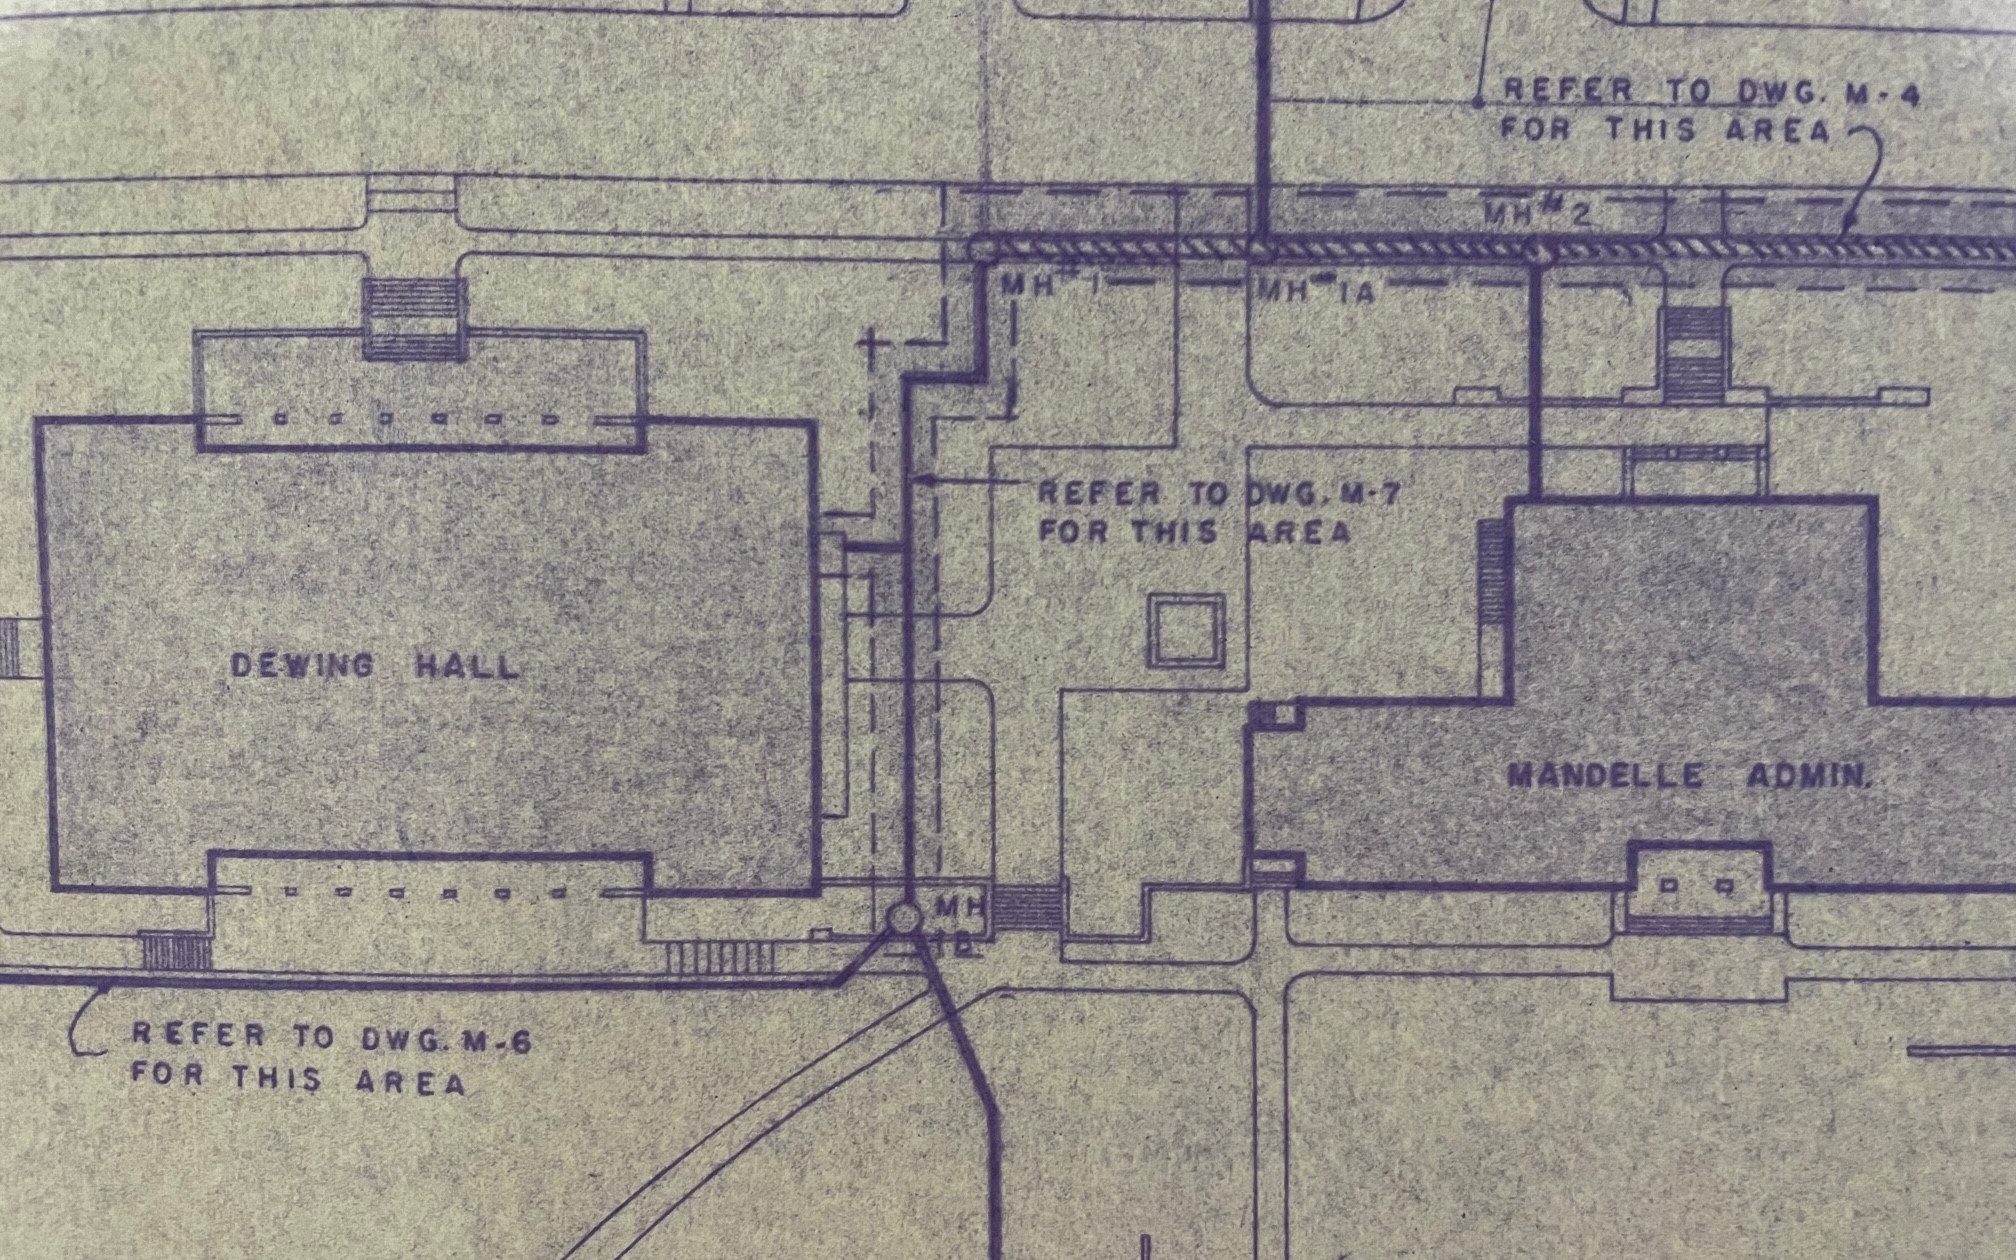 Blueprint of campus steam system illustrating the steam line traveling up Academy street, turning 90 degrees at Red Square and vault at south end.